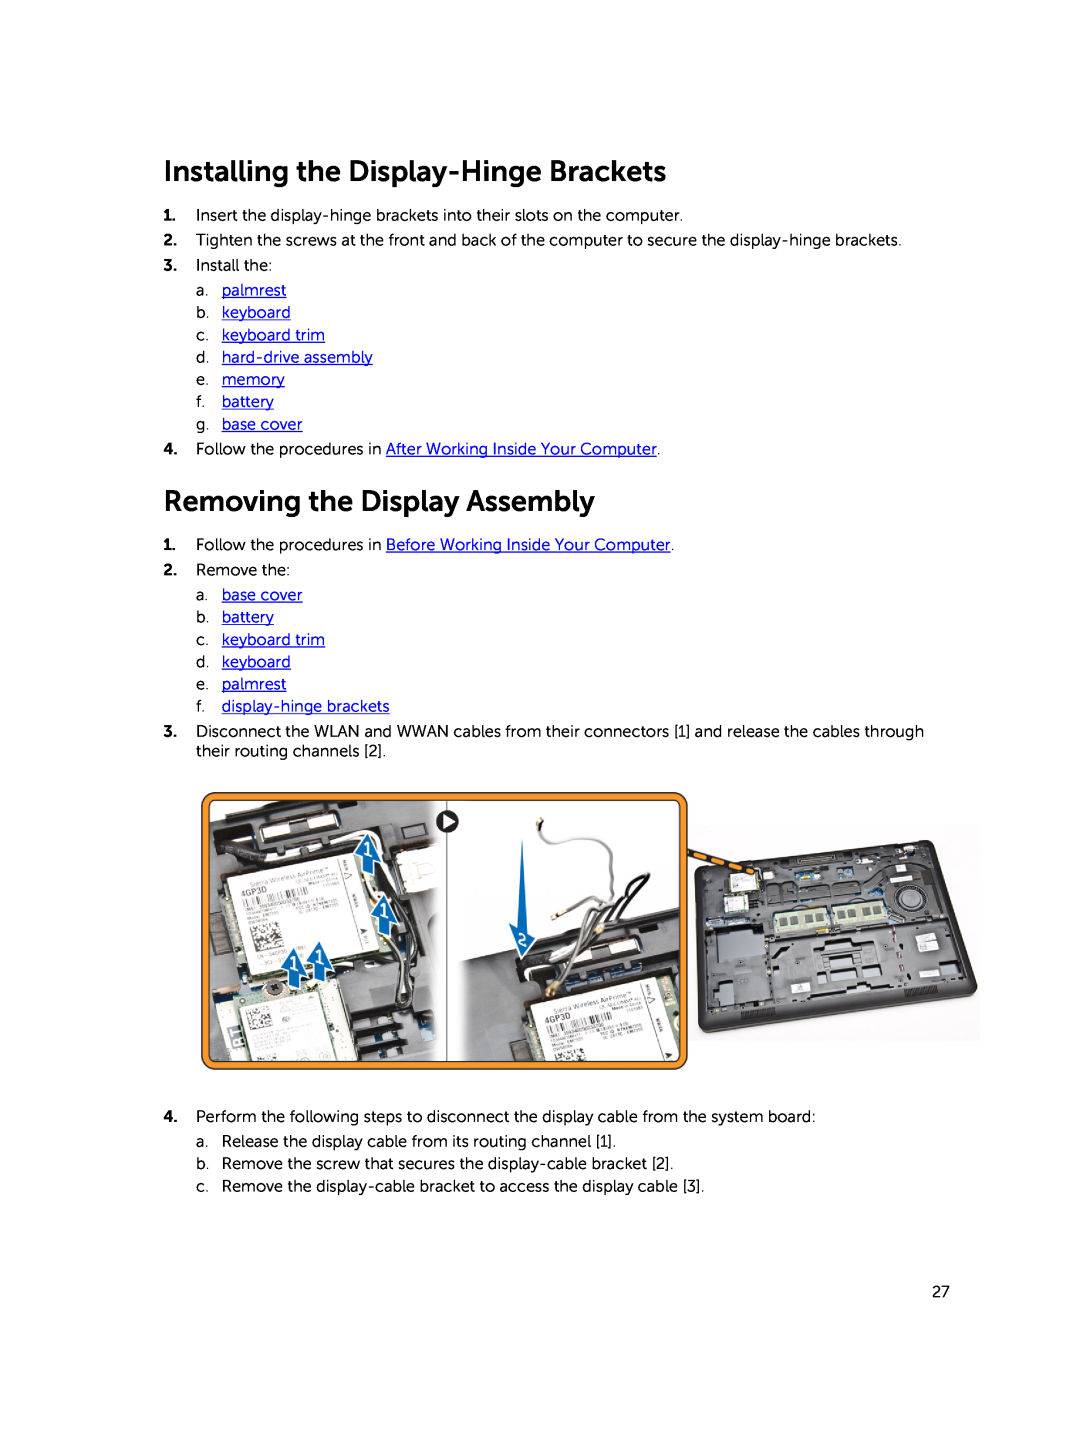 Dell E5450 owner manual Installing the Display-Hinge Brackets, Removing the Display Assembly 